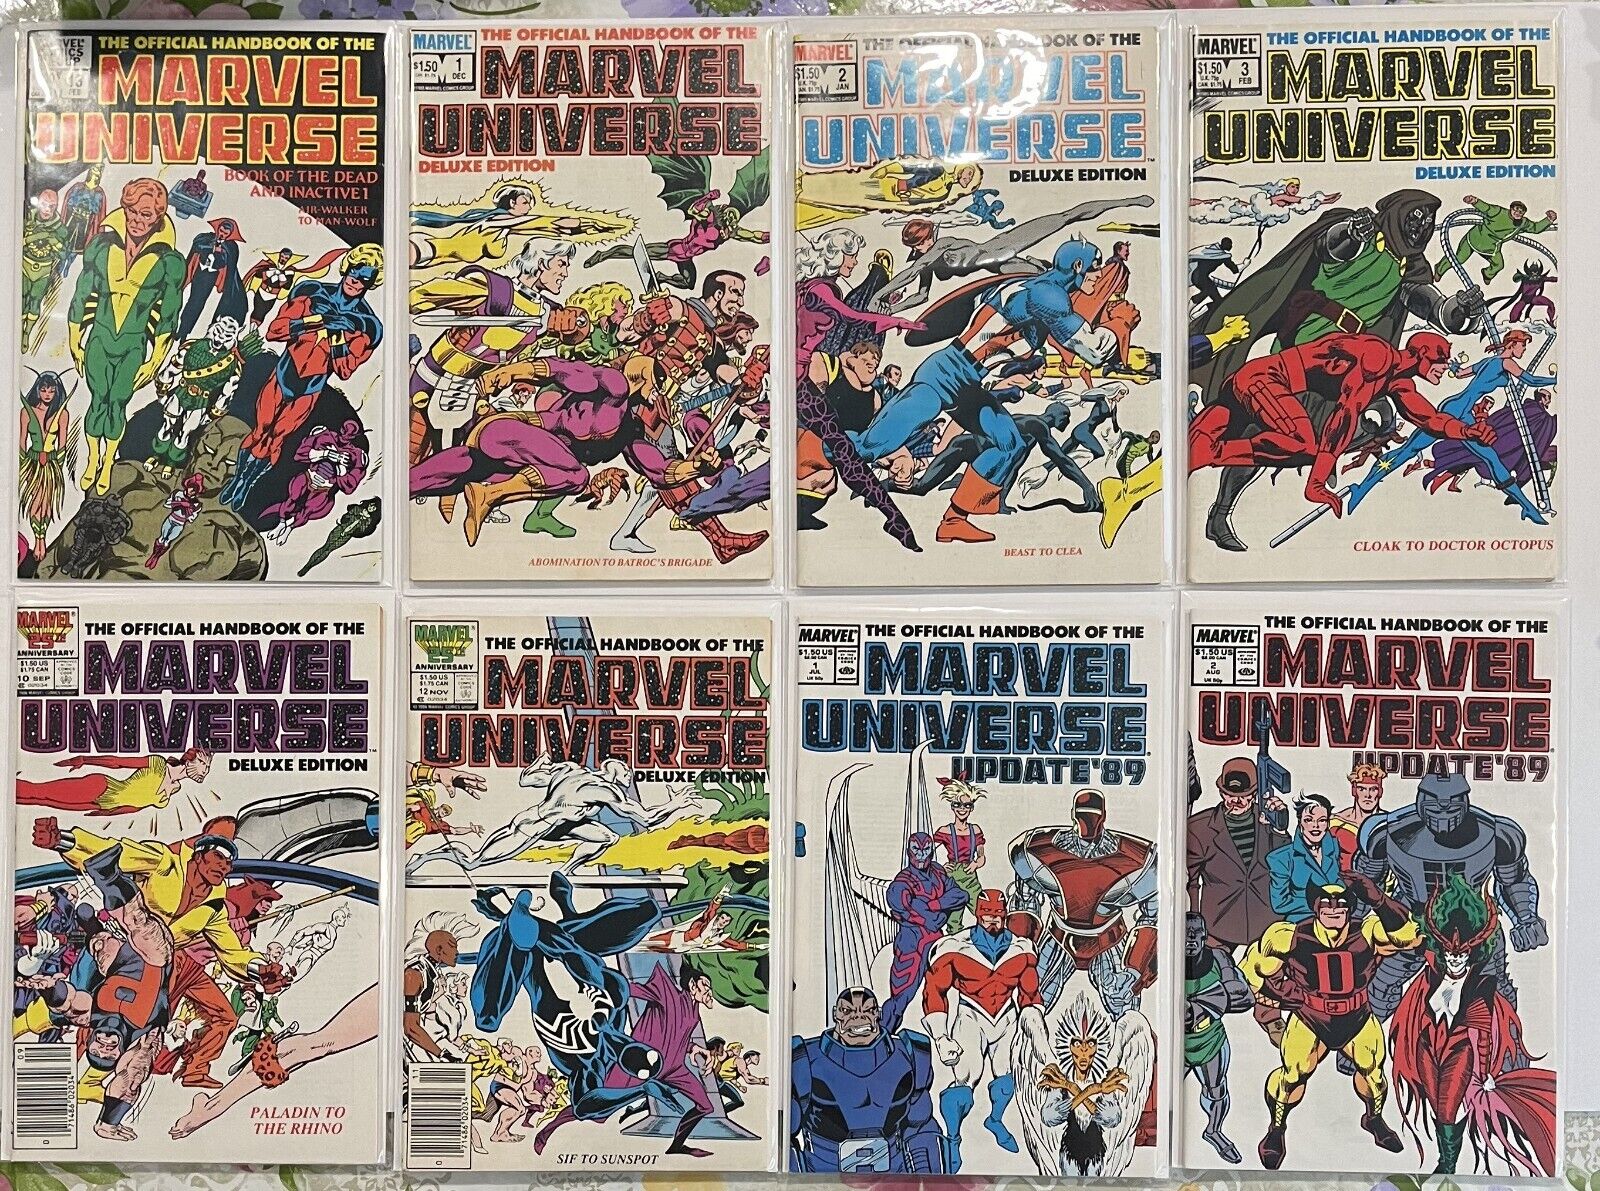 The Official Handbook of the Marvel Universe Lot of 16 of Vol1, Vol 2 and Vol 3